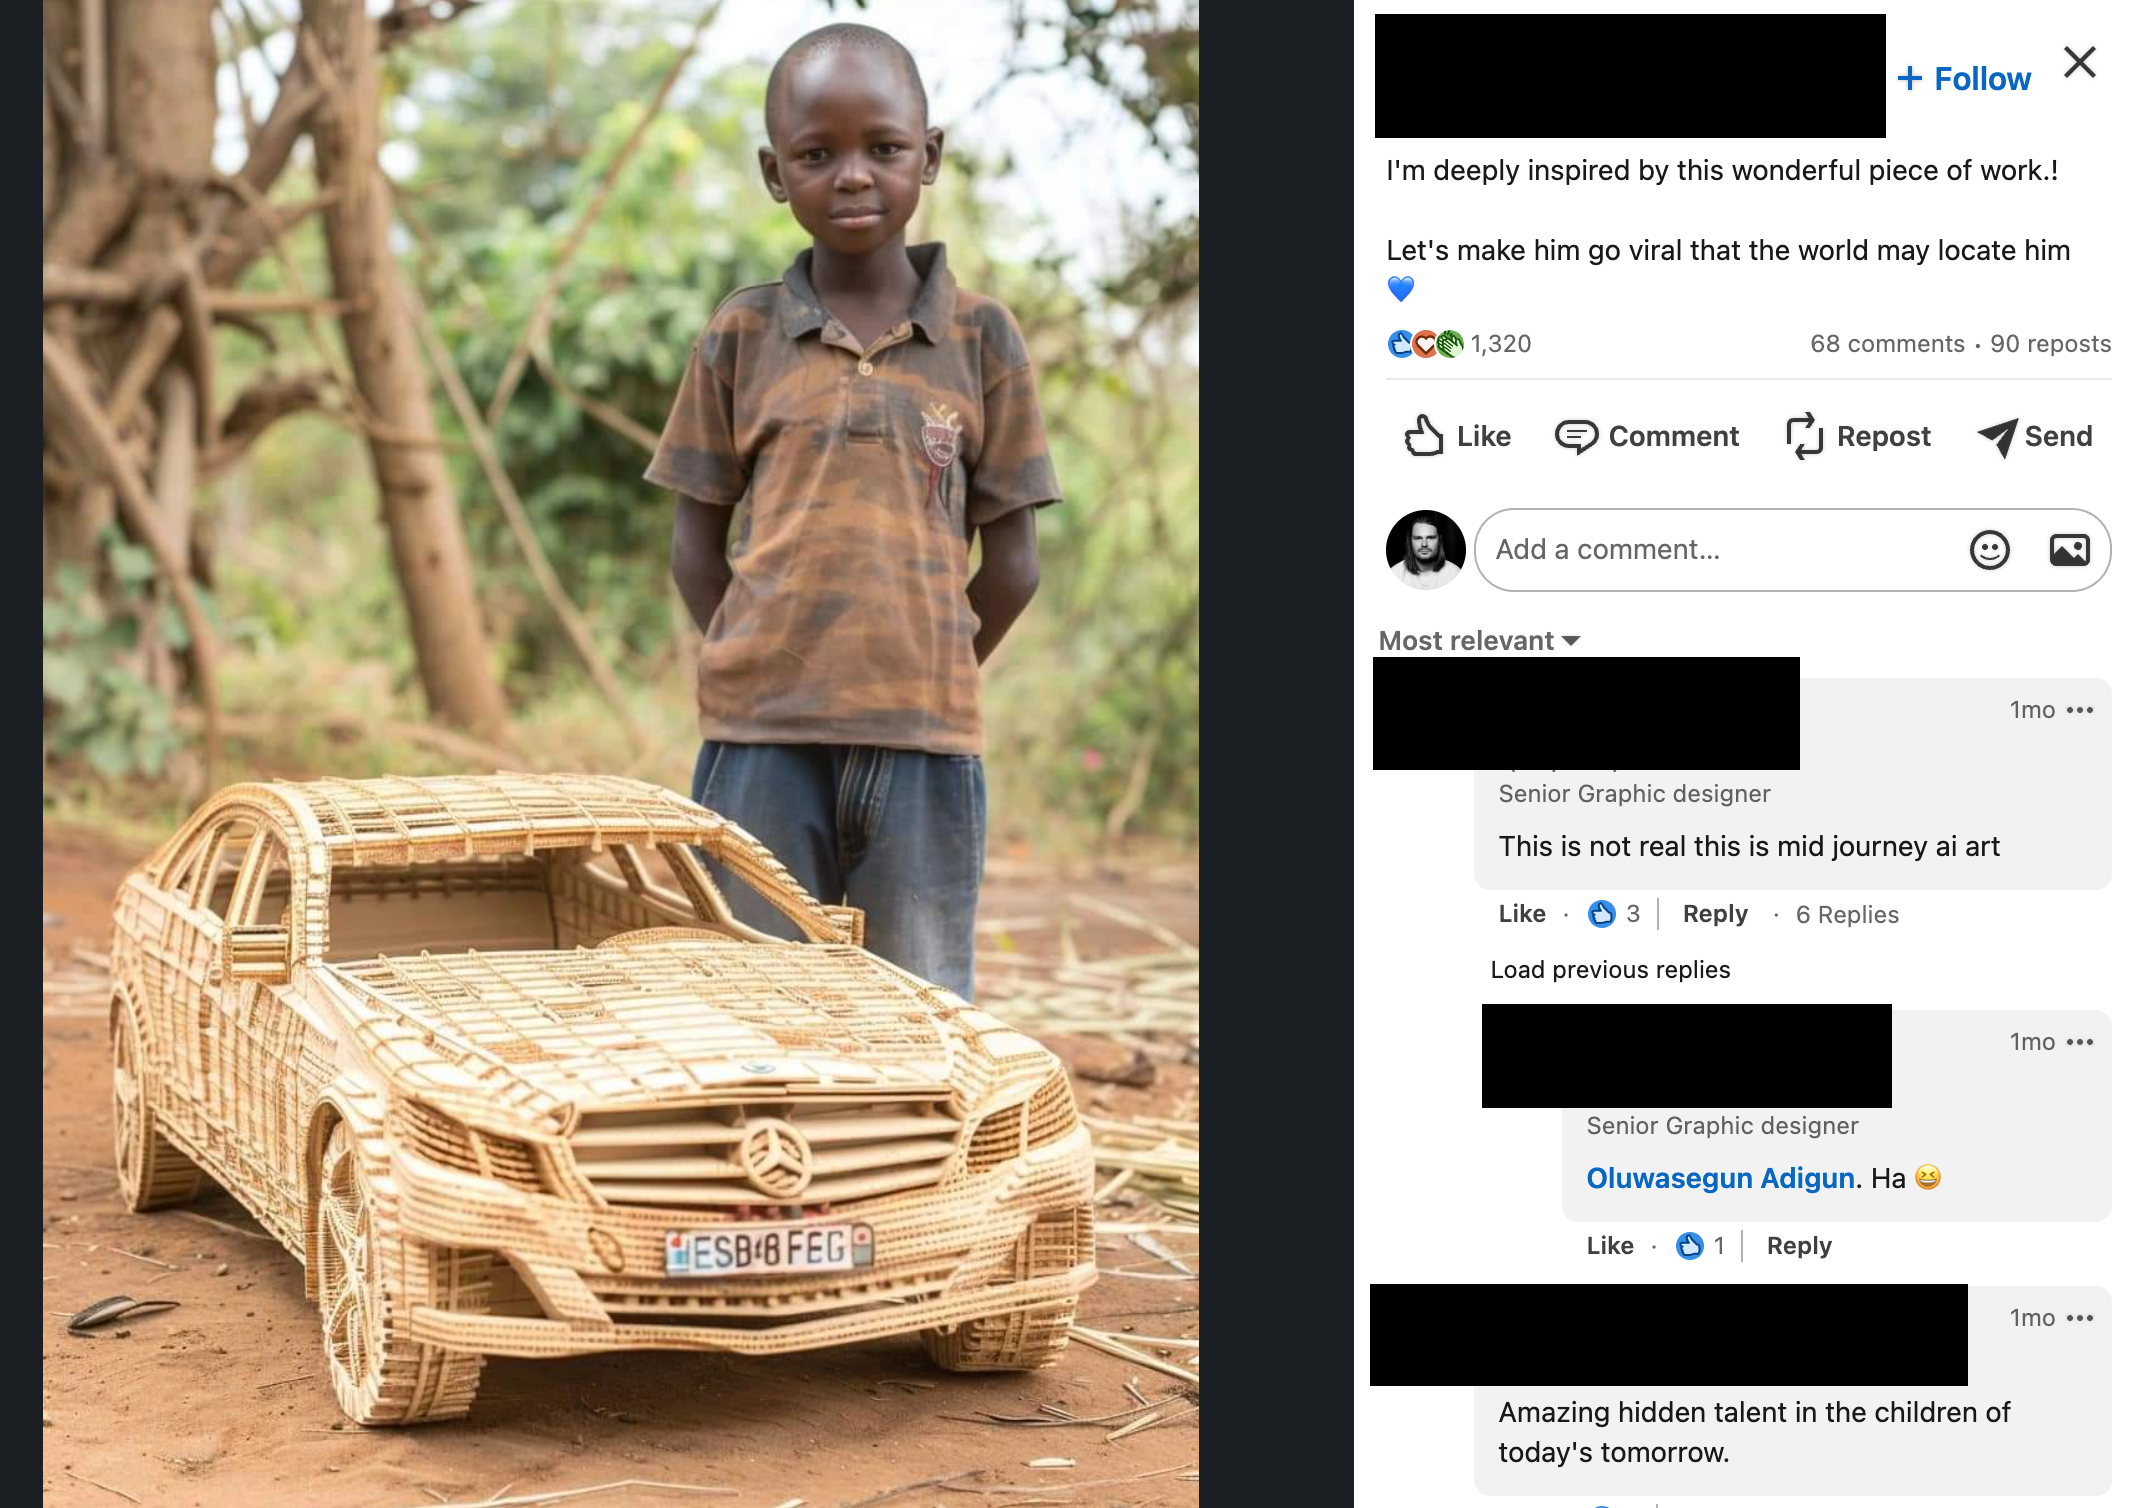 Facebook’s Bizarre AI Images Now on LinkedIn, Too